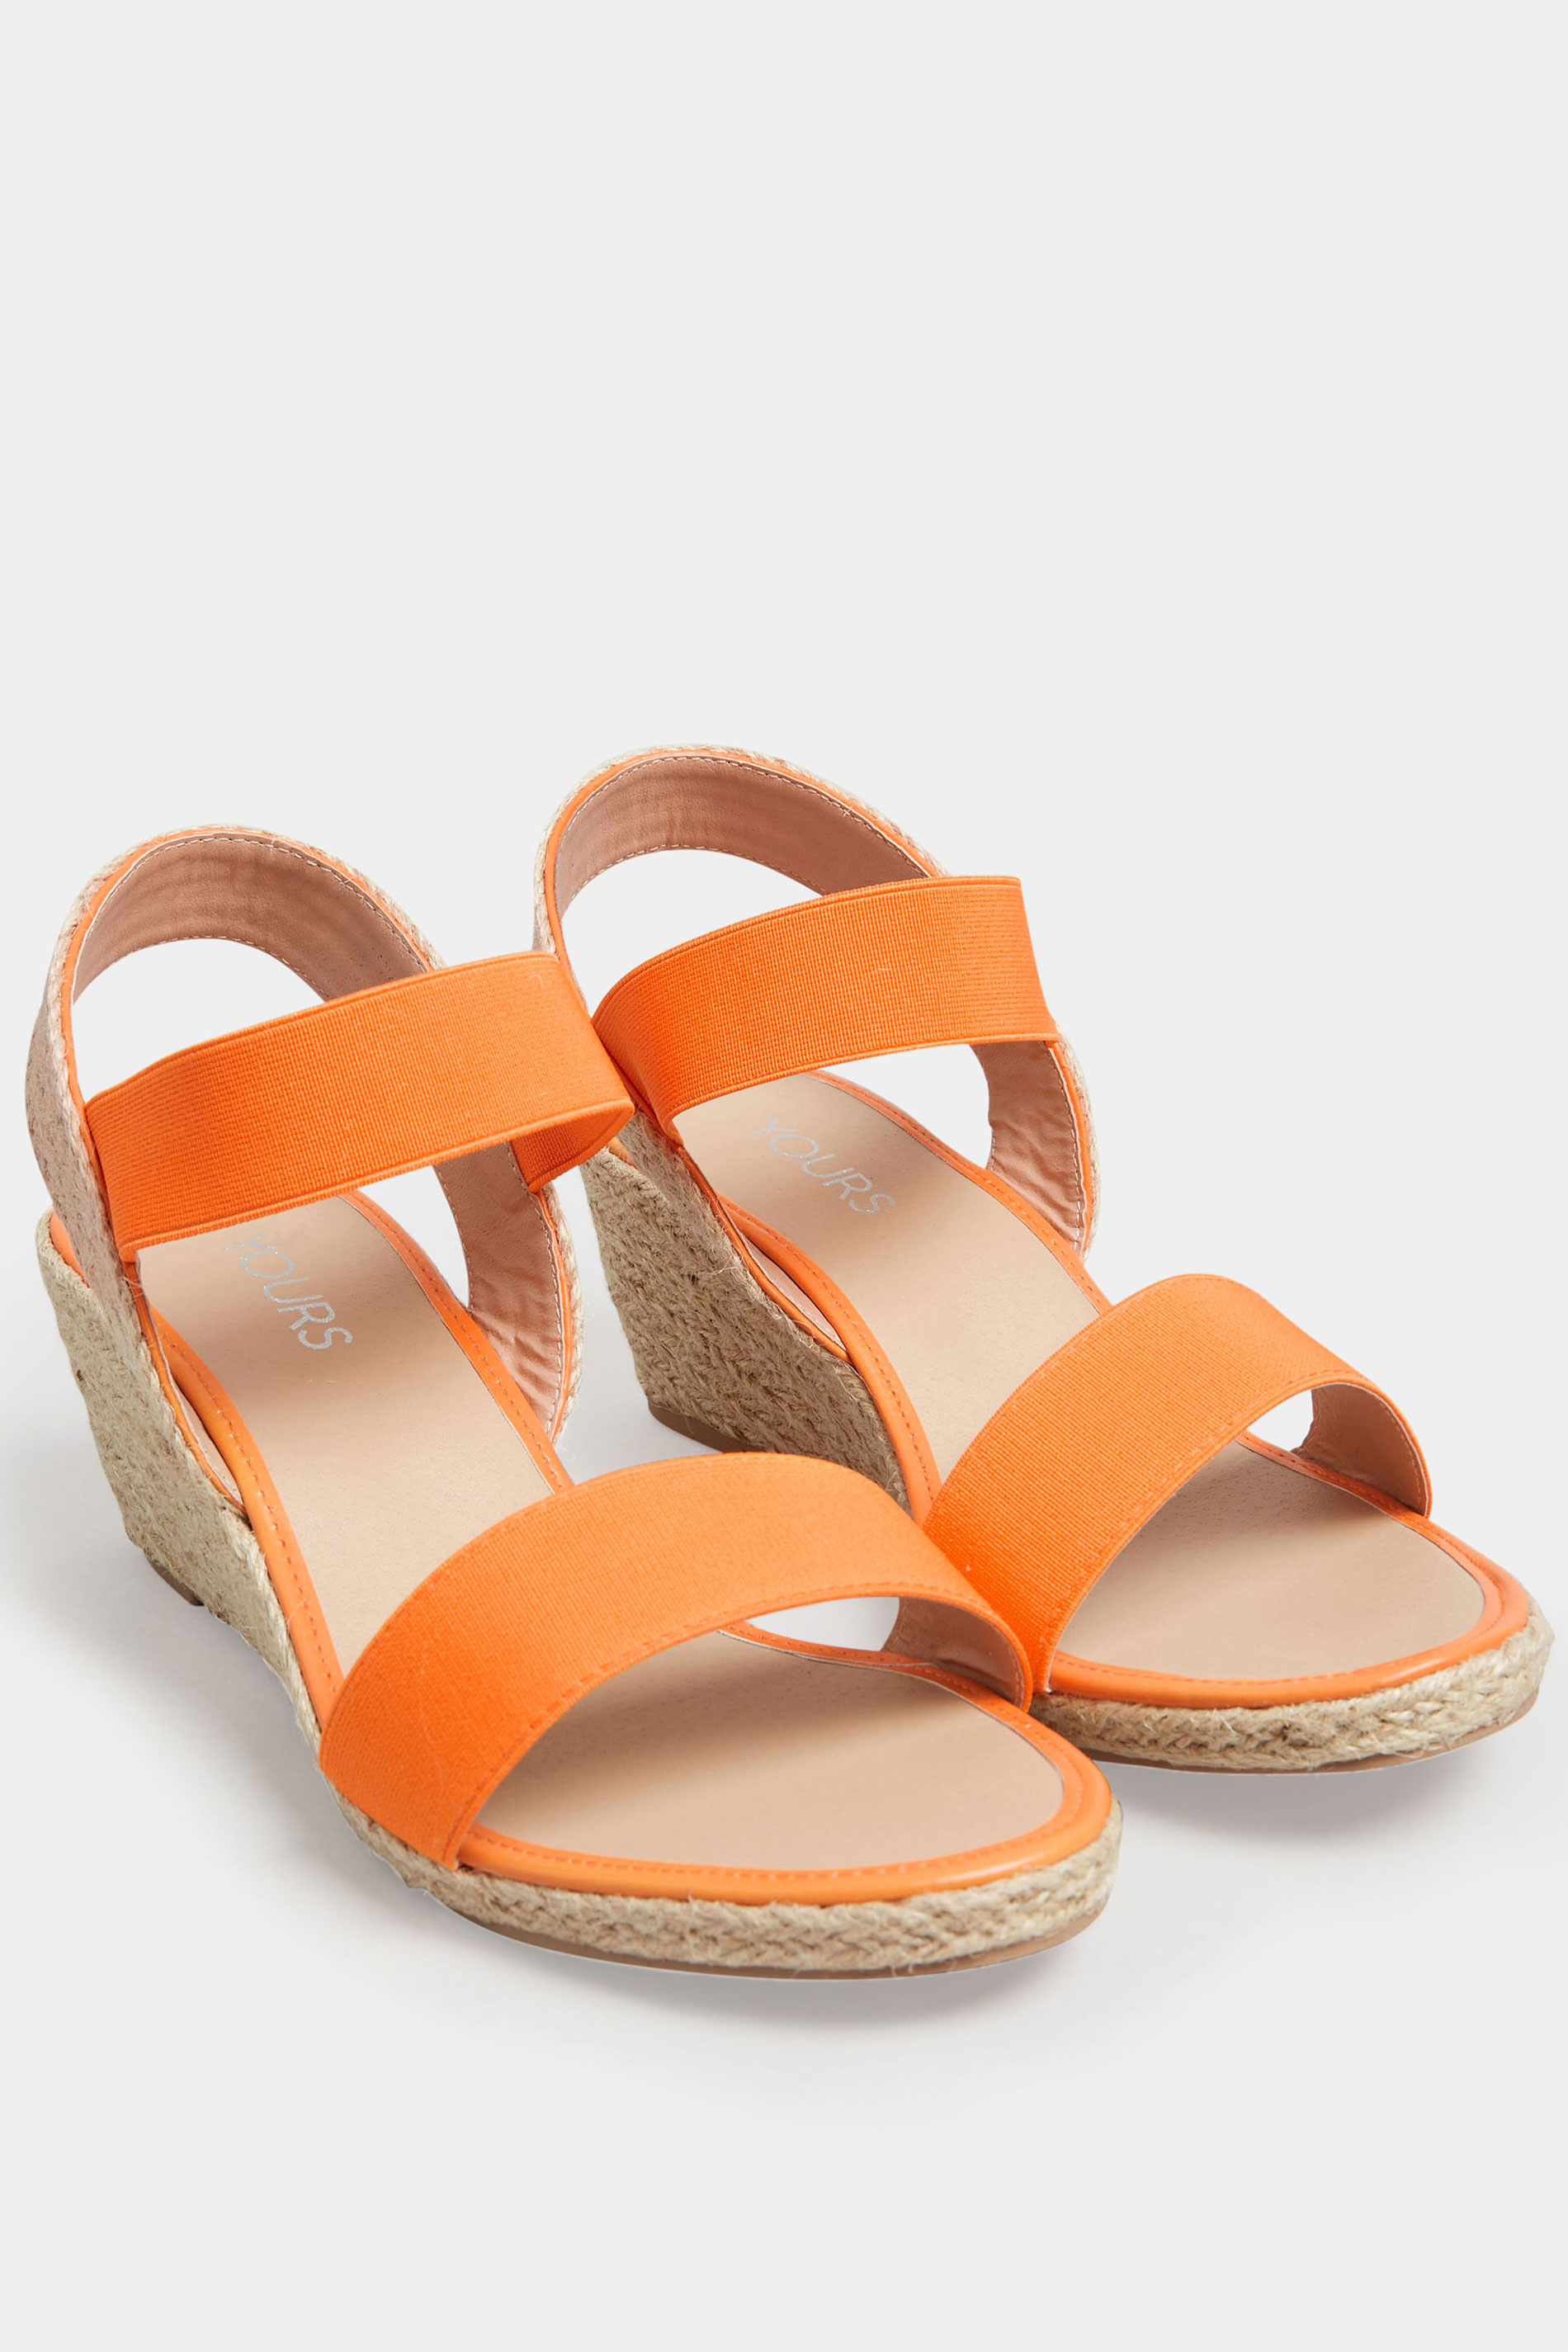 Orange Espadrille Wedges In Wide E Fit & Extra Wide EEE Fit | Yours Clothing 2